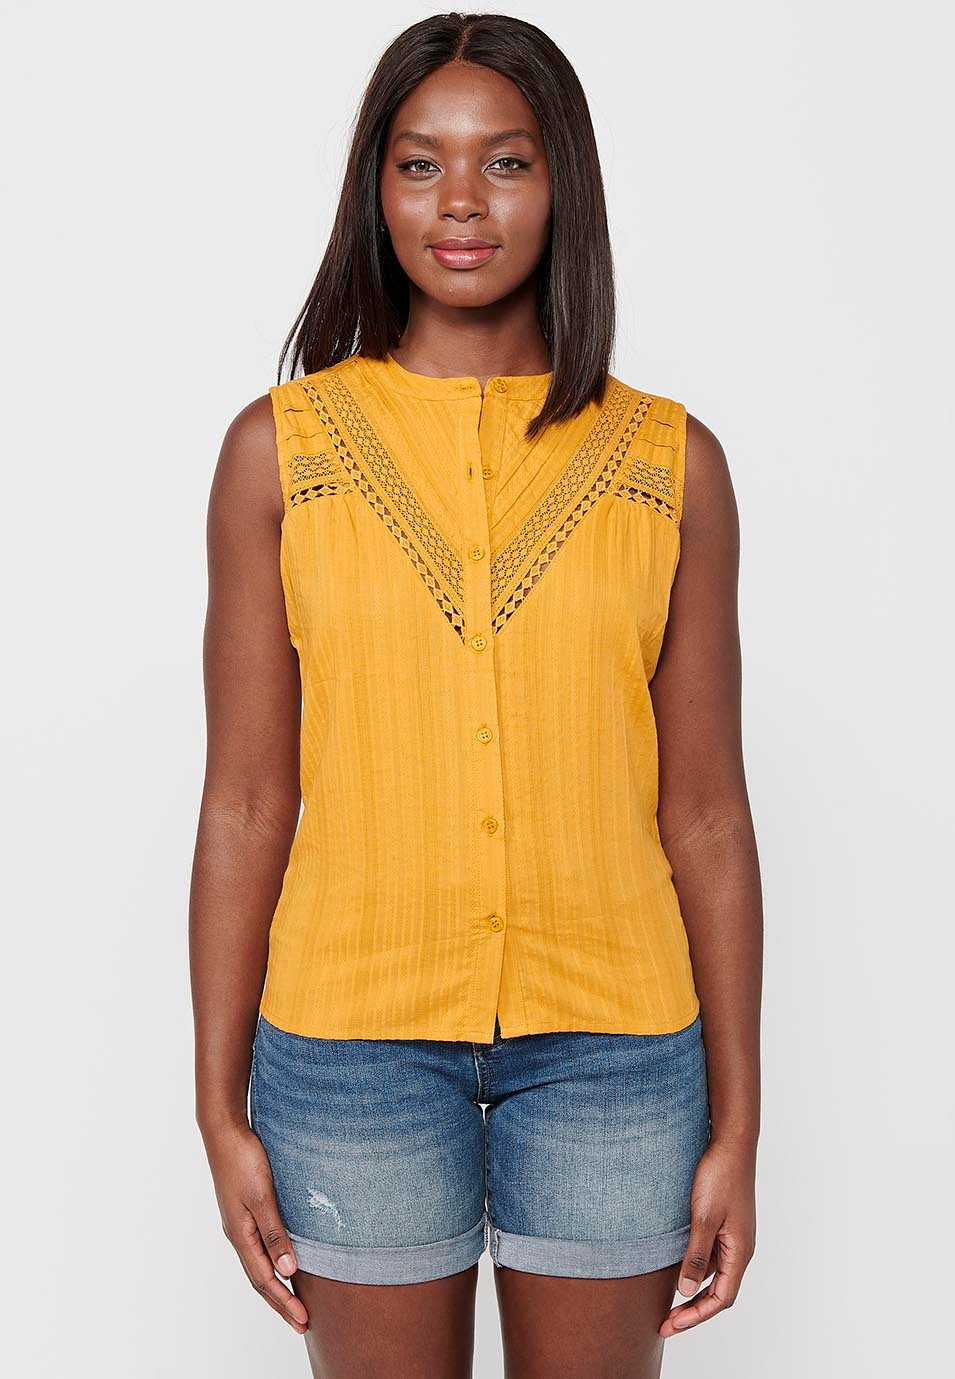 Sleeveless Cotton Blouse with Round Neck and Front Closure with Buttons and Embroidered Details in Mustard Color for Women 1